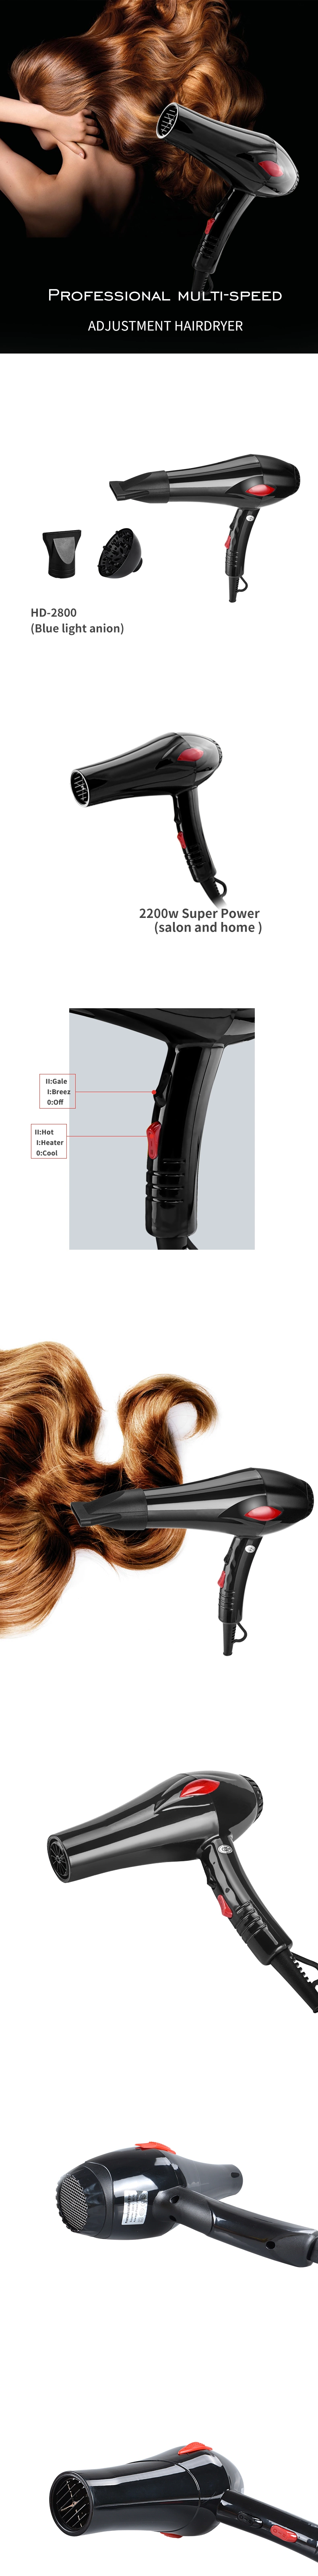 Professional Hair and Beauty Salon Tools Salon Equipment Wholesale Hair Dryer Tools with 2 Speed